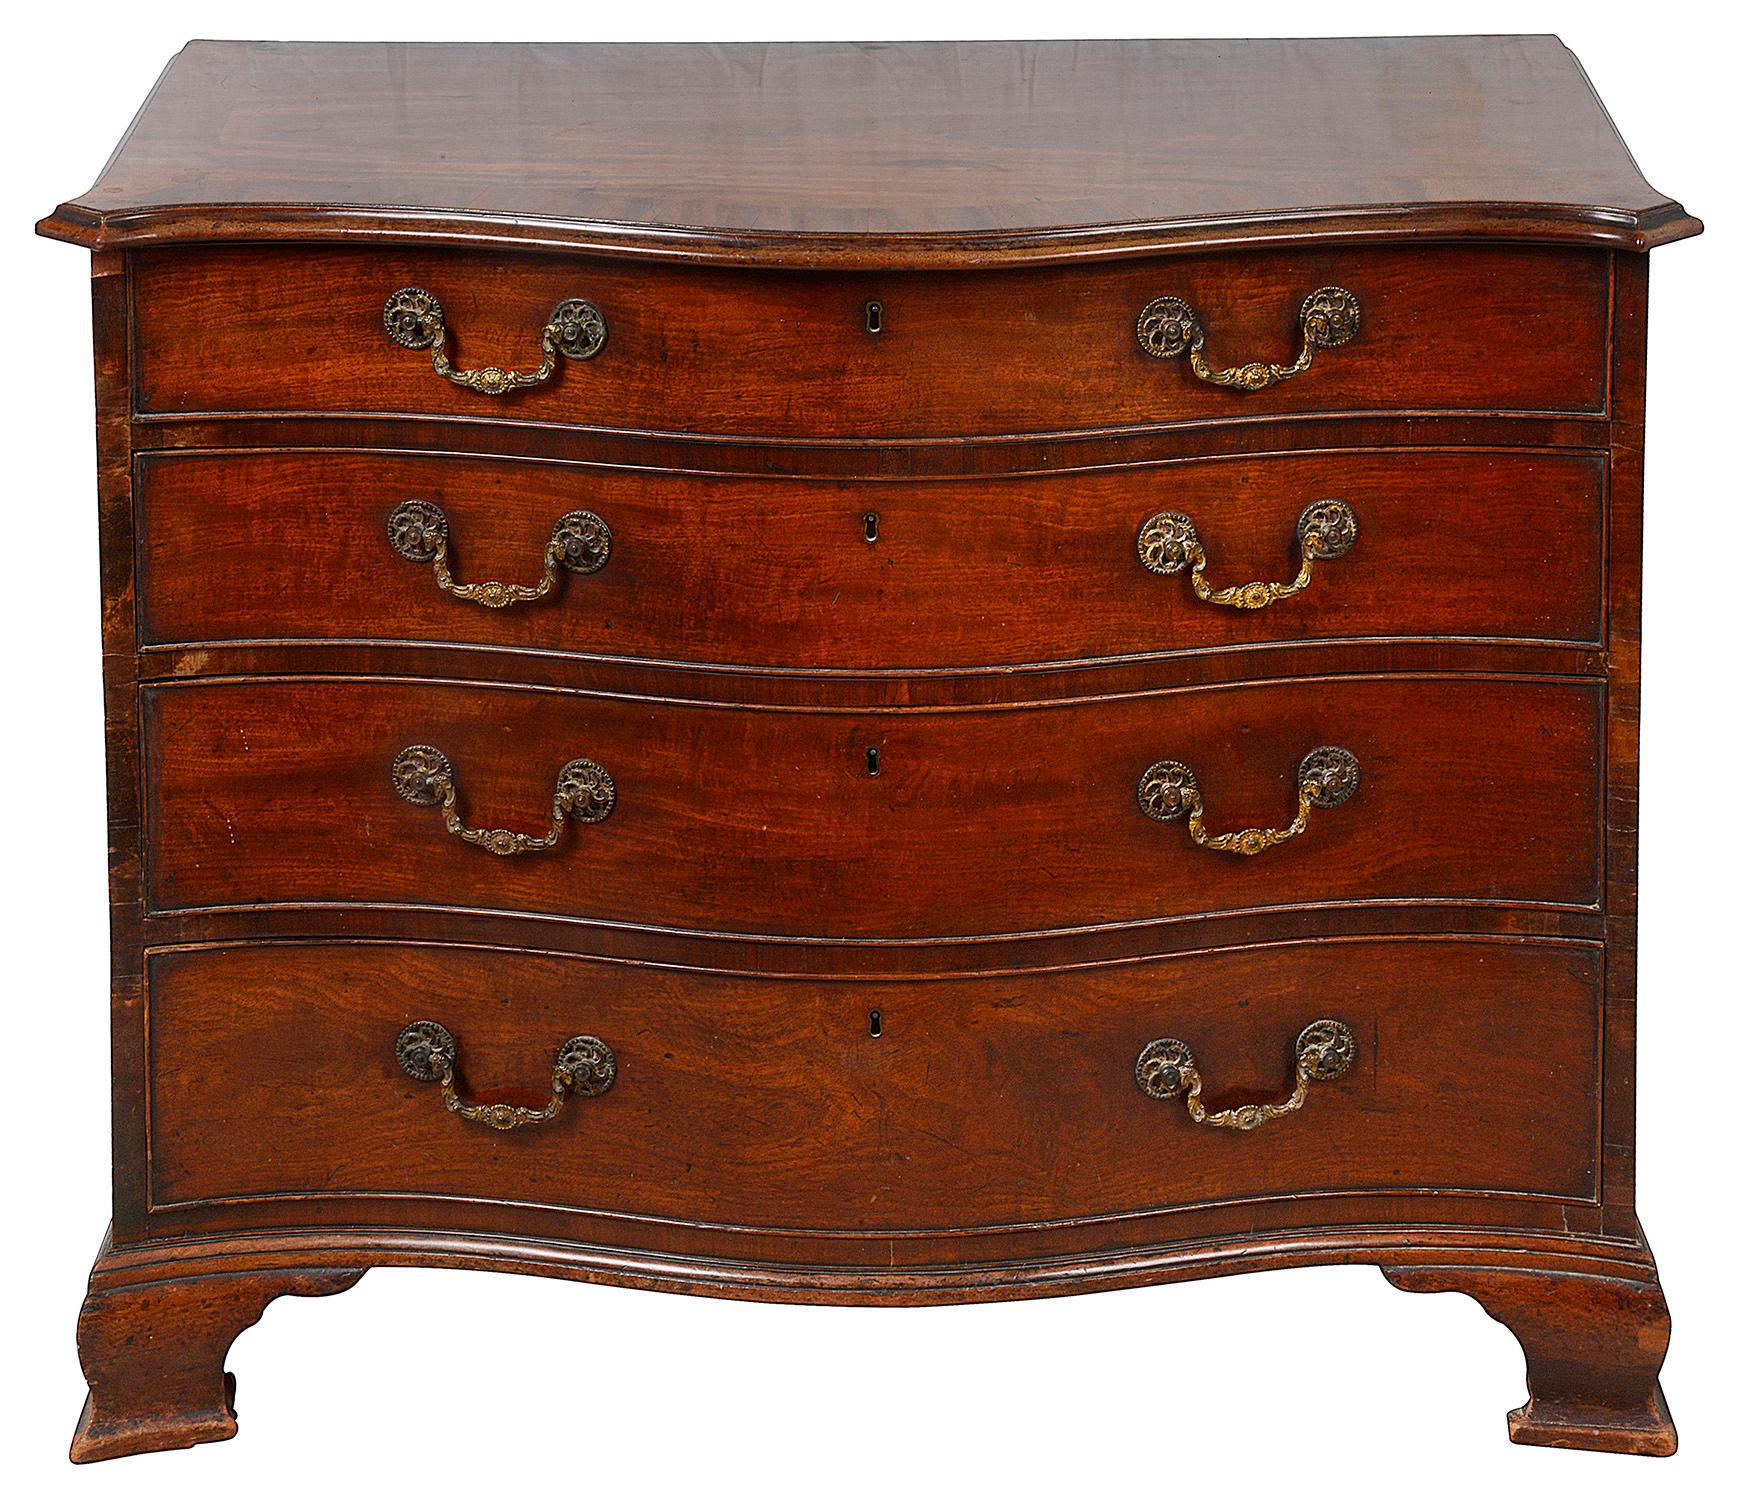 A very good quality late 18th Century mahogany serpentine fronted chest of drawers, having a good original patina, a crossbanded top, the original brass pierced swan neck handles, cock needed drawers, the top drawer fitted with a brushing slide and